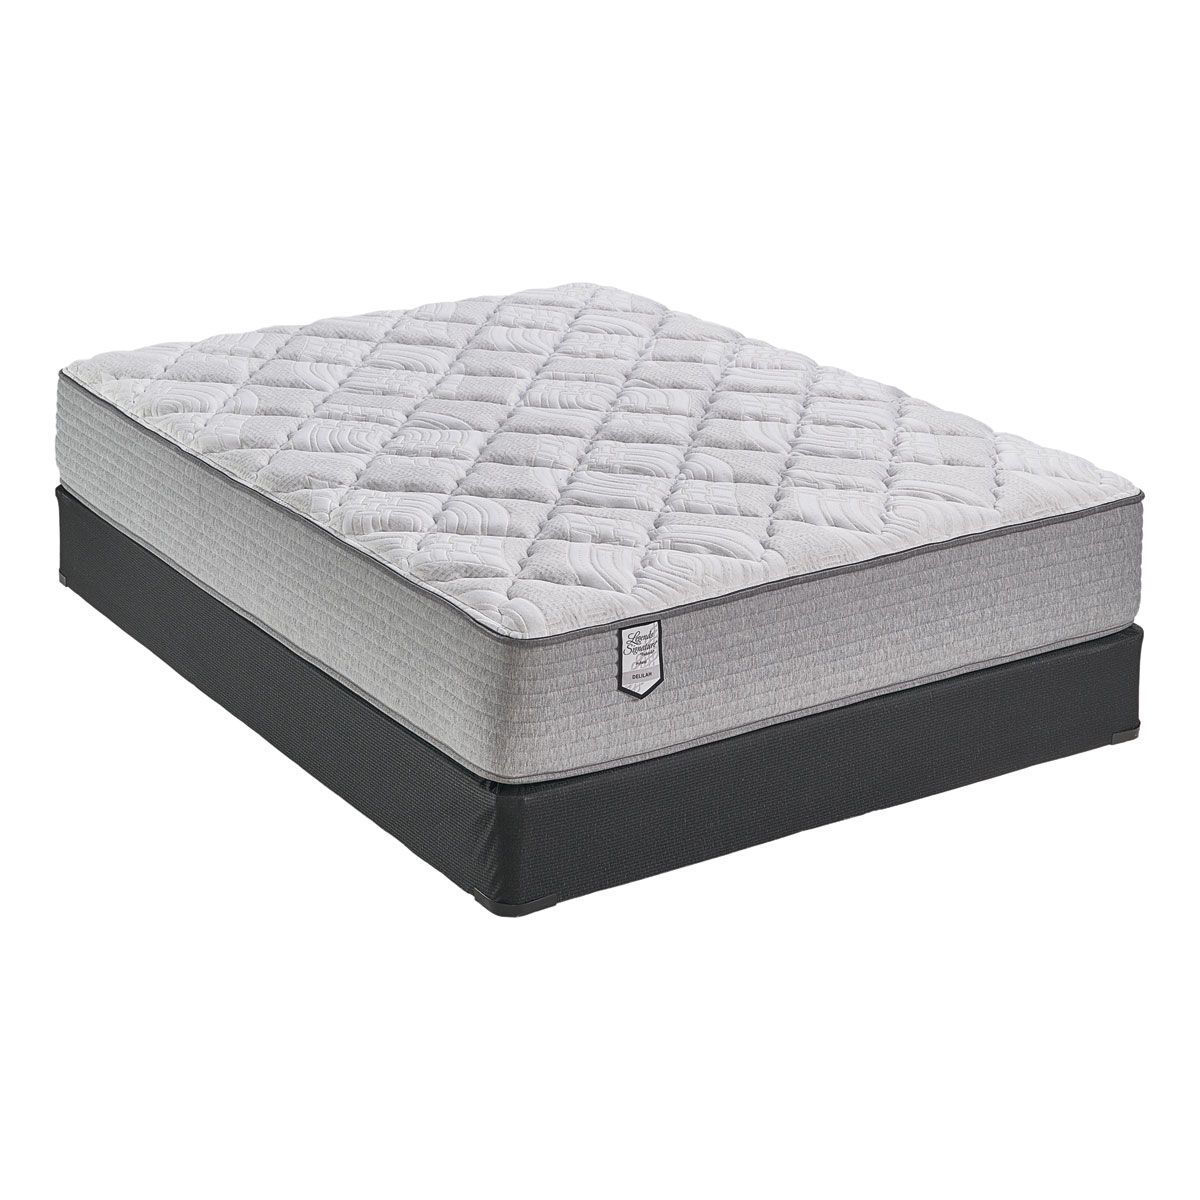 Picture of LEGENDS DELILAH LUXURY FIRM TWIN XL MATTRESS SET